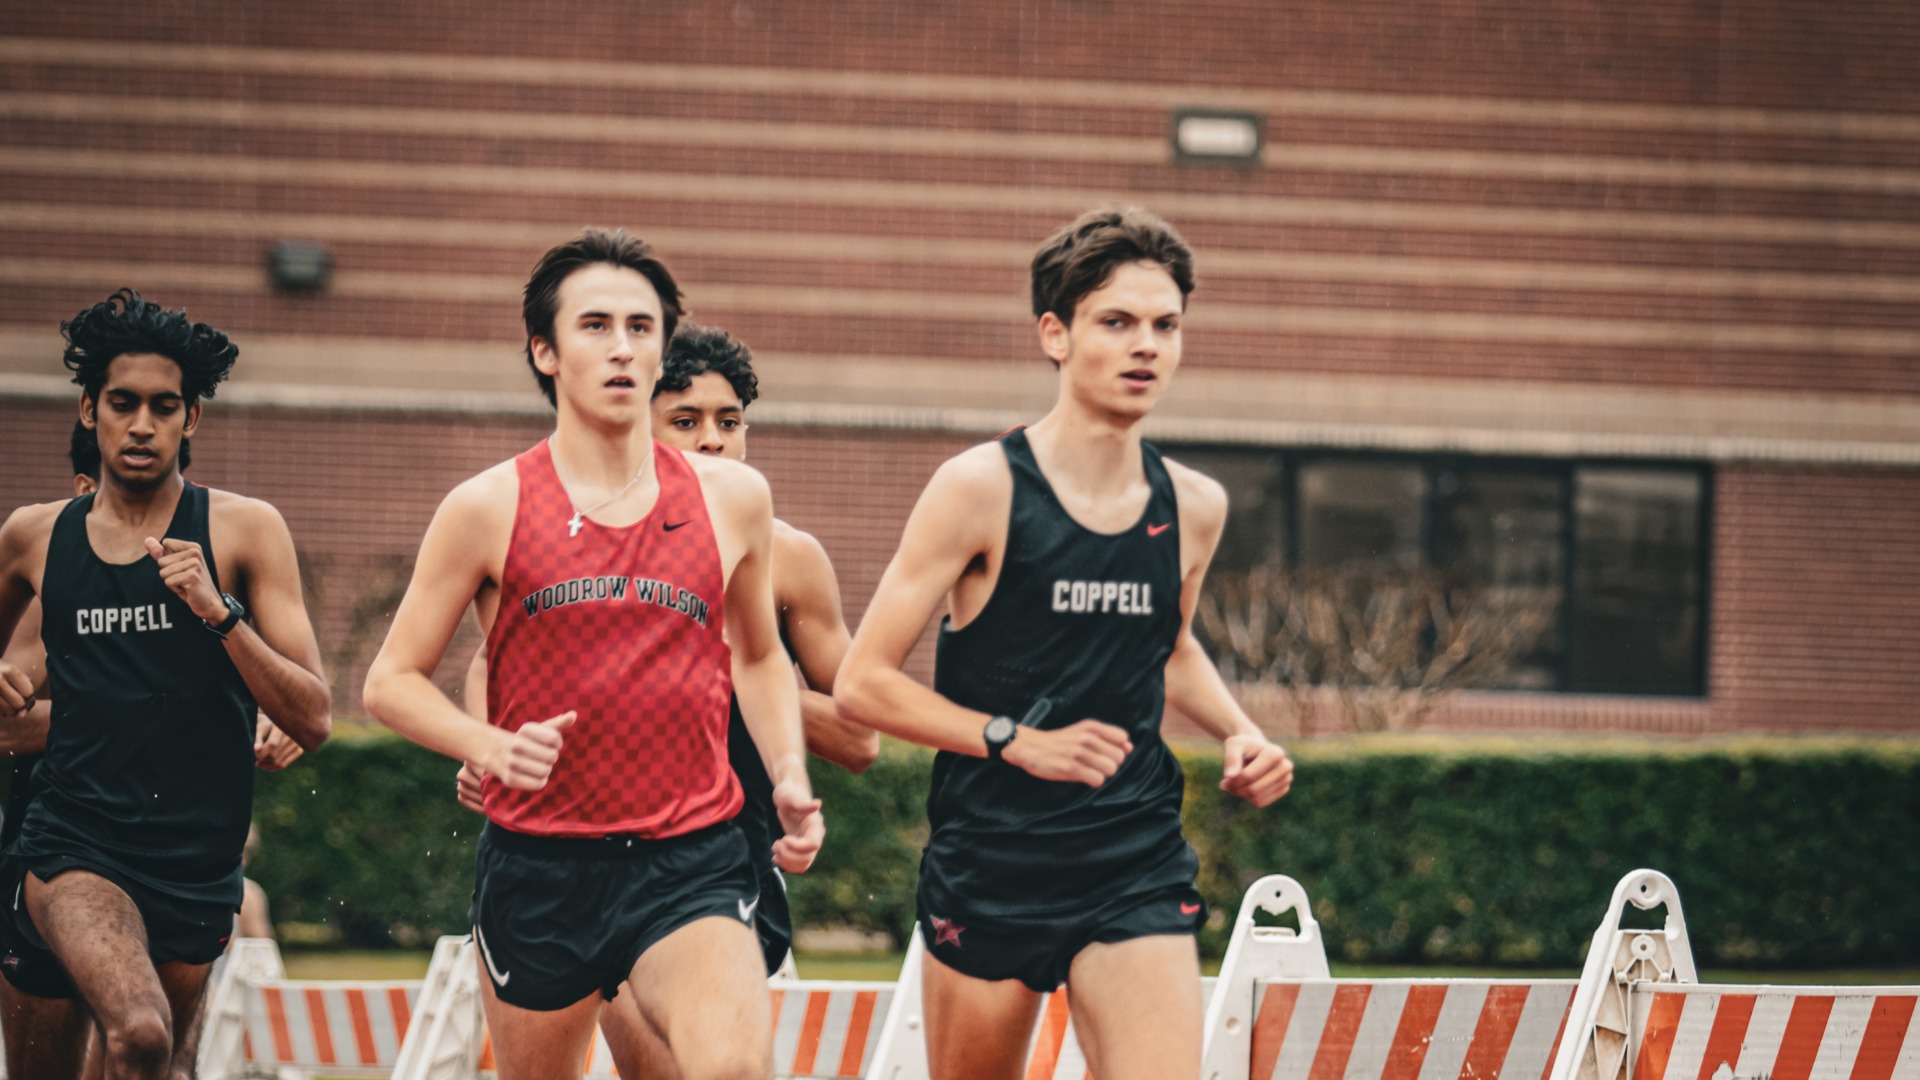 Coppell High SchoolSlide 1 - BOYS TRACK HEADED TO REGIONALS